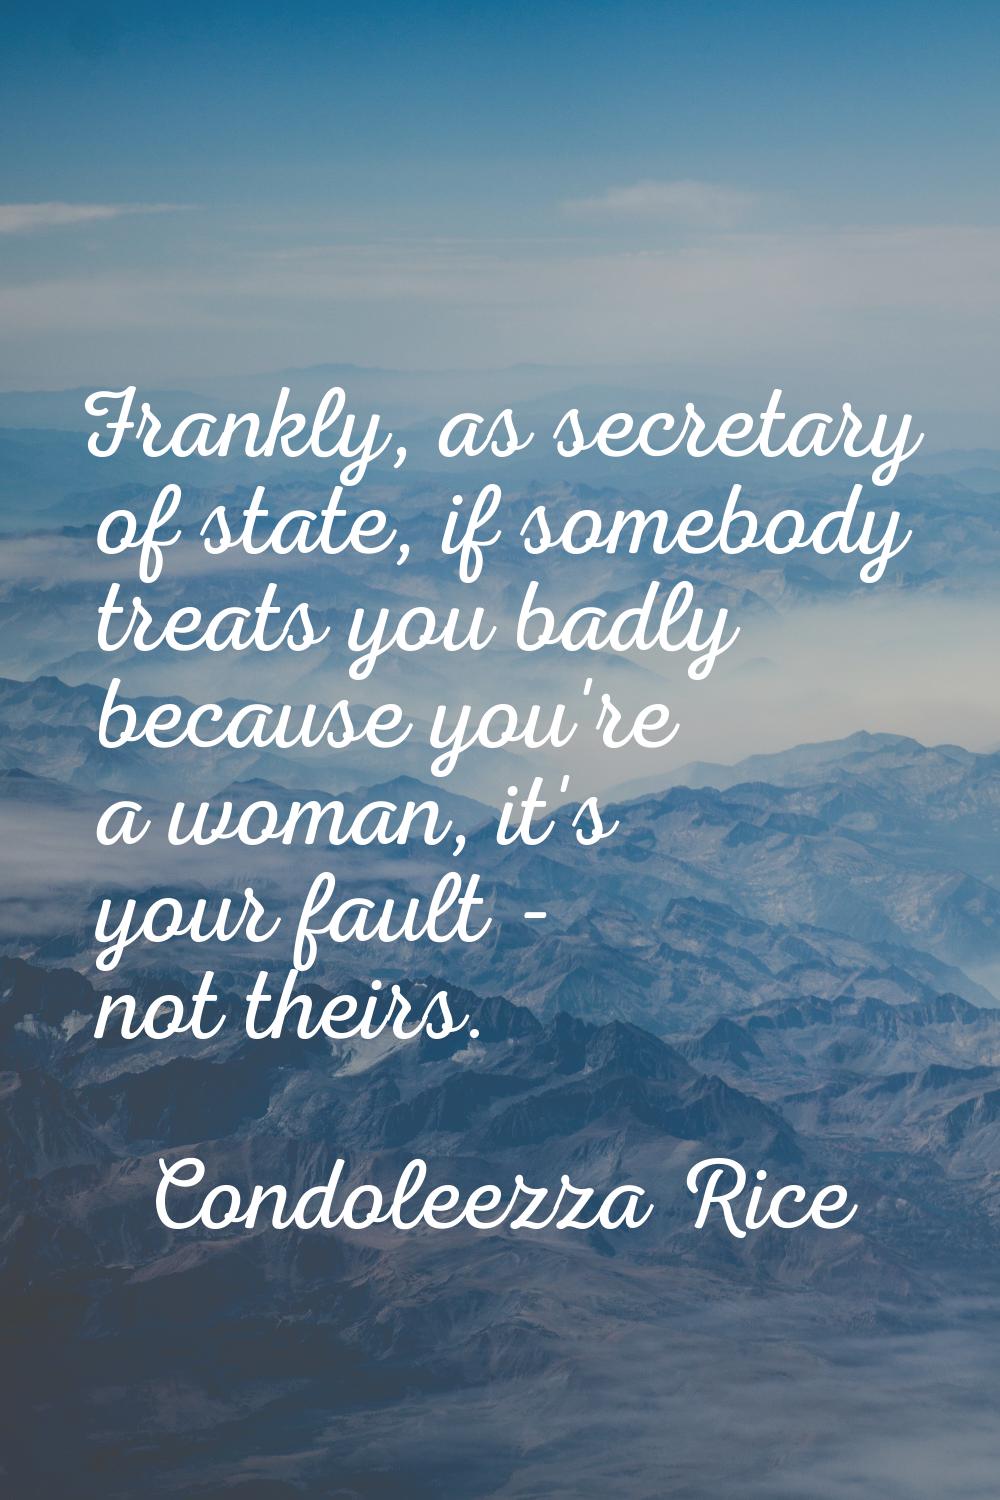 Frankly, as secretary of state, if somebody treats you badly because you're a woman, it's your faul